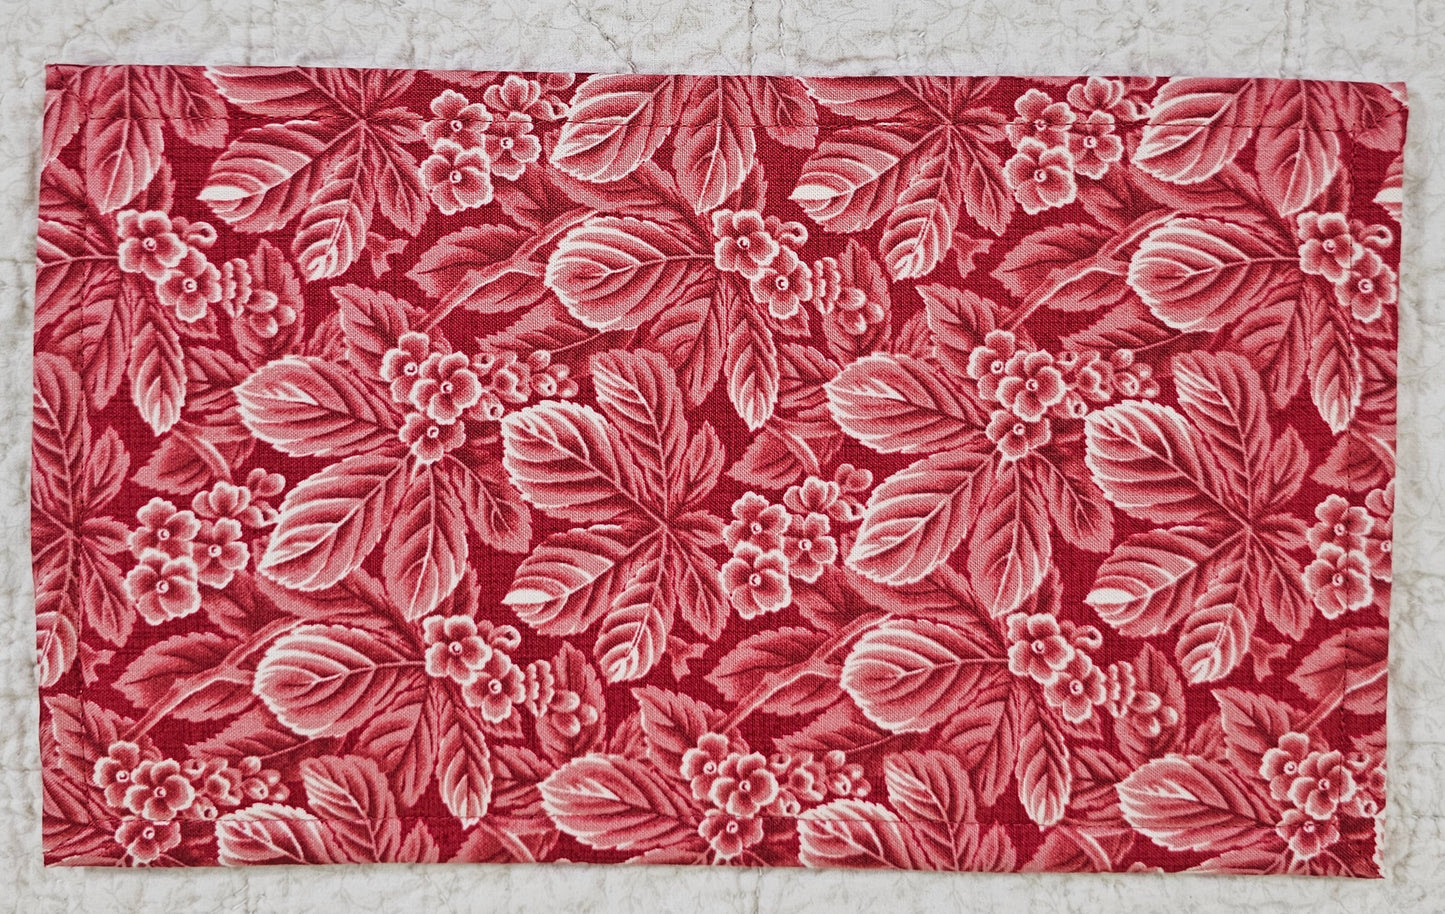 Variations on Red Floral - 6.5" x 11" Pouches